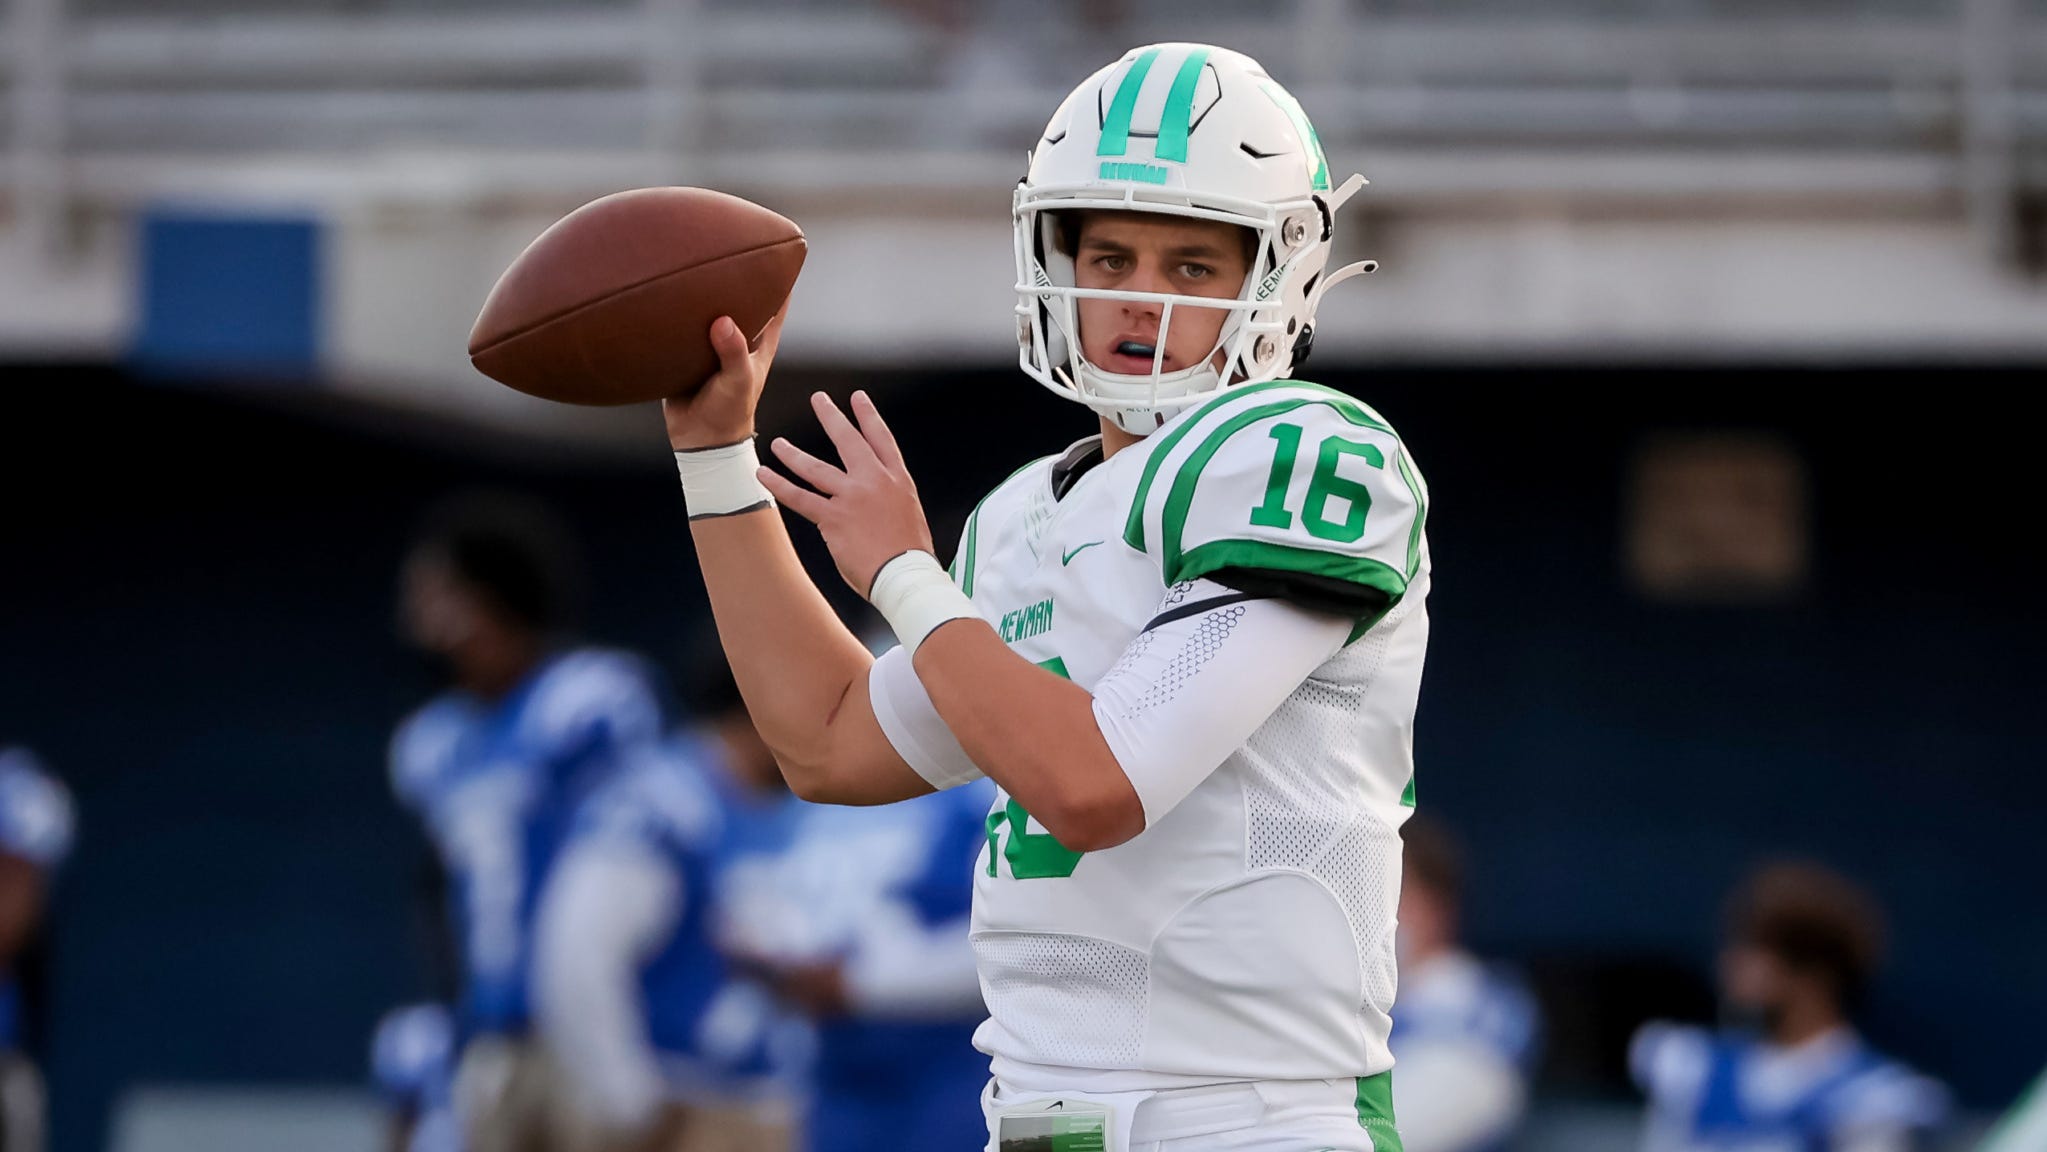 Five-star 2023 quarterback Arch Manning interested in visiting UNC, father says